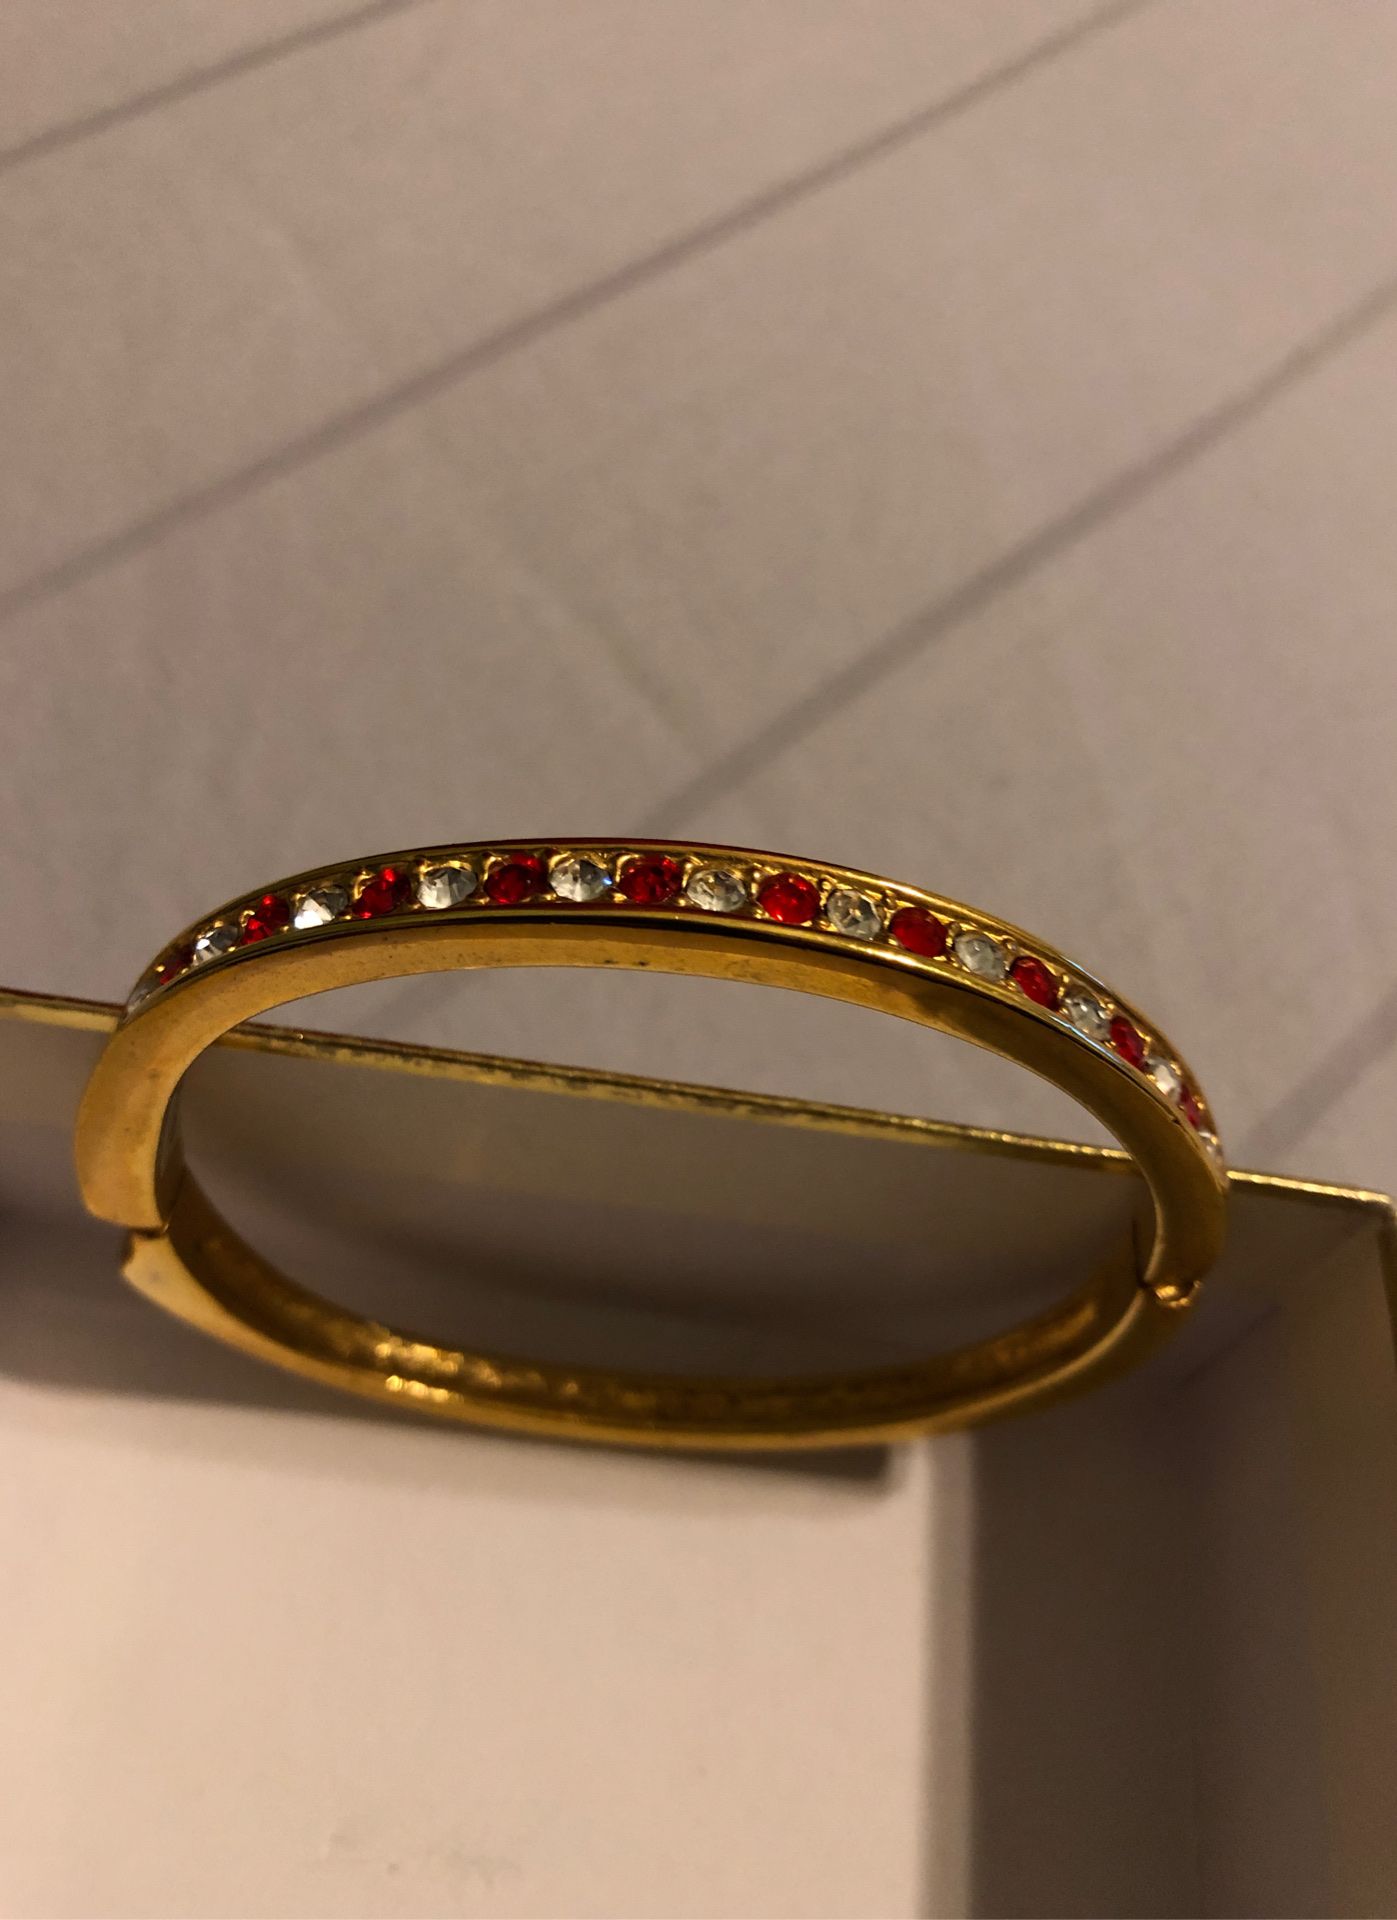 Gold plated bangle bracelet with beautiful stone detail